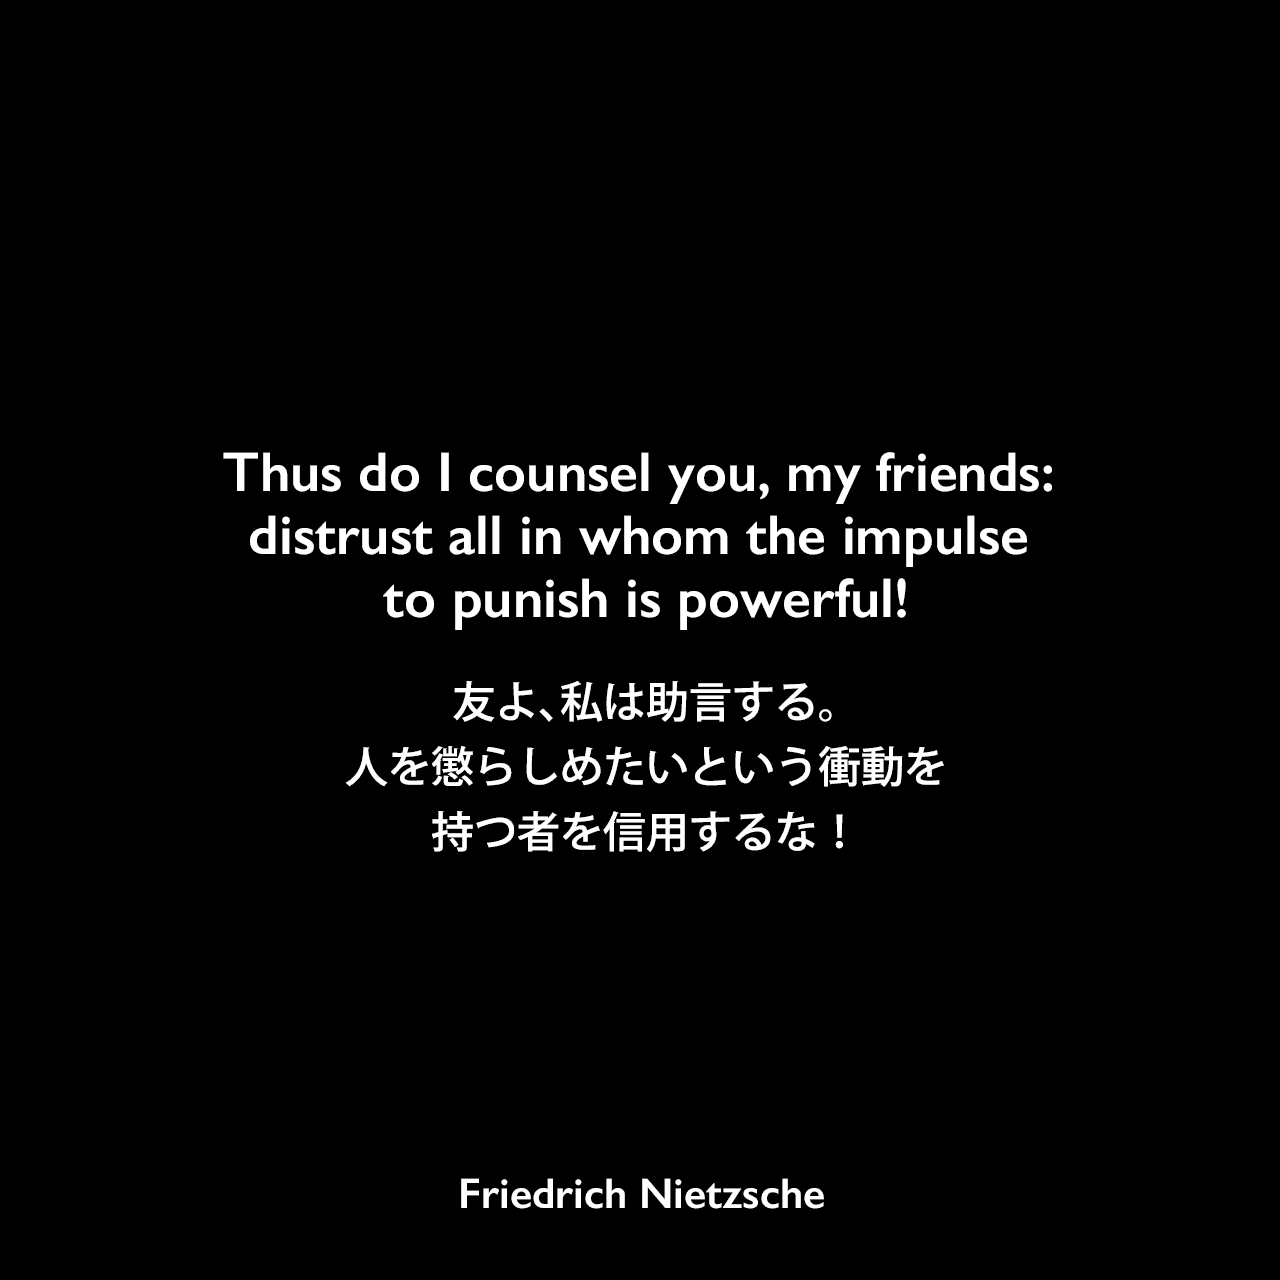 Thus do I counsel you, my friends: distrust all in whom the impulse to punish is powerful!友よ、私は助言する。人を懲らしめたいという衝動を持つ者を信用するな！Friedrich Nietzsche